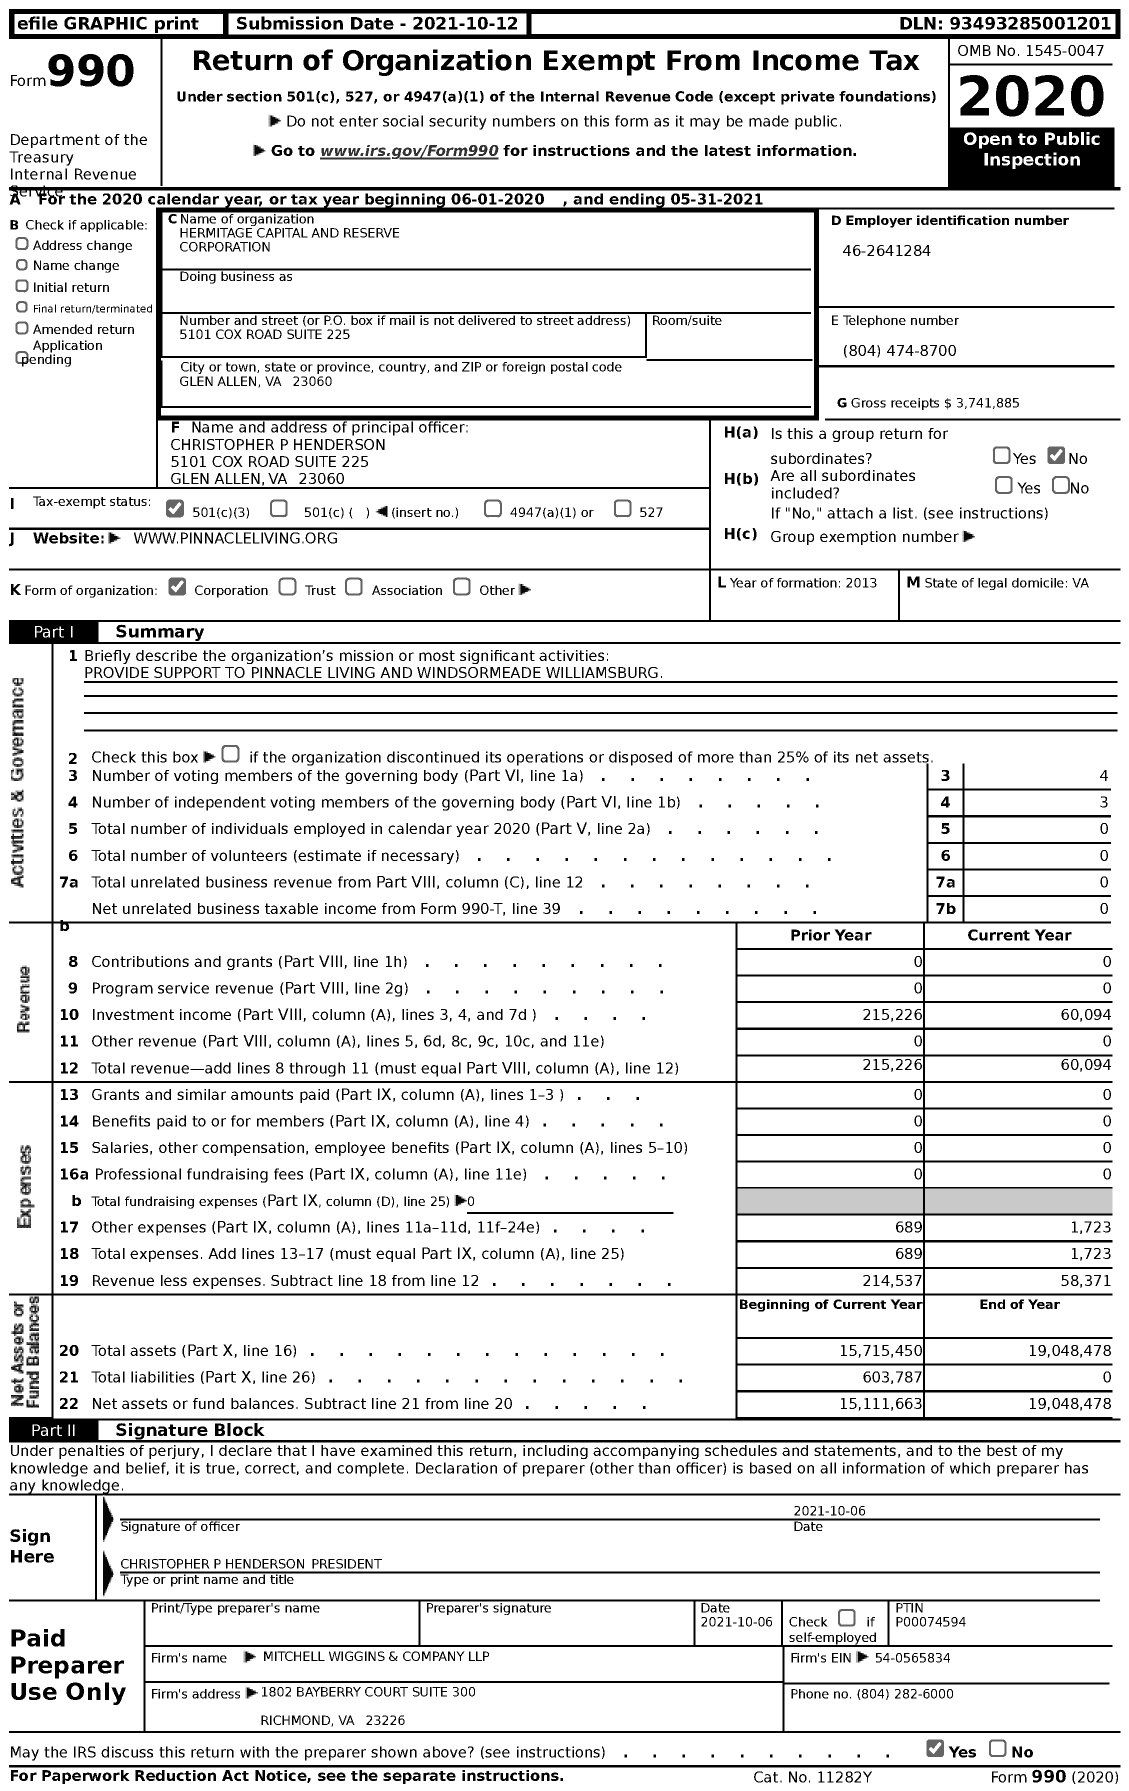 Image of first page of 2020 Form 990 for Hermitage Capital and Reserve Corporation